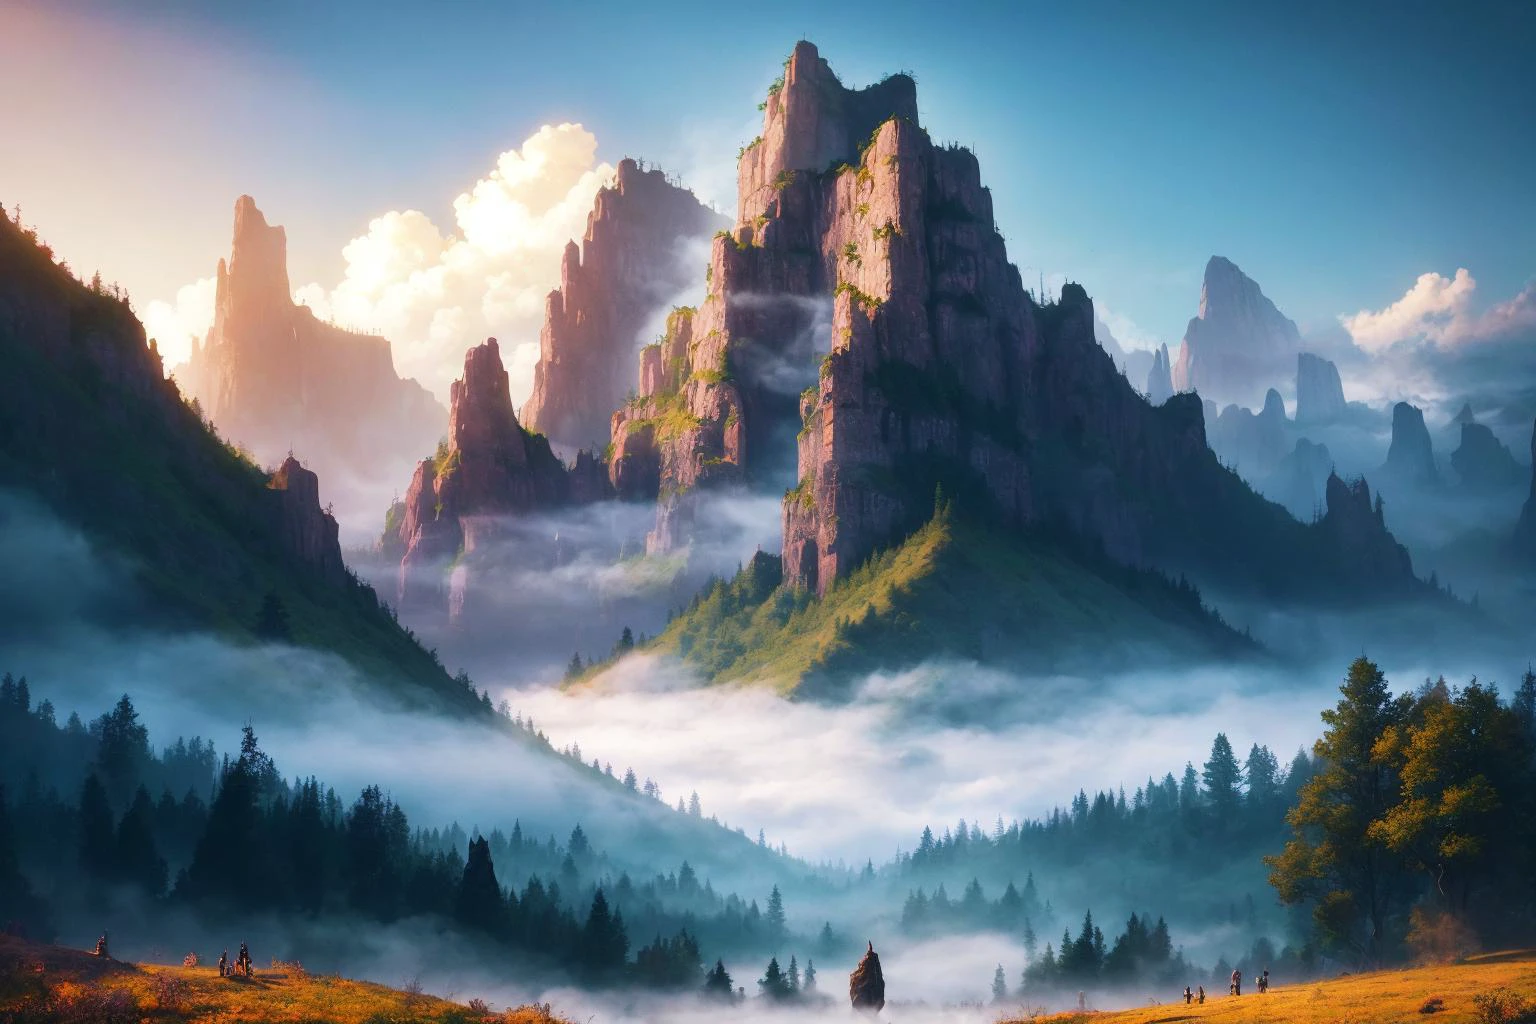 (masterpiece), (best quality), (incredible digital artwork), atmospheric scene inspired by a Peter Jackson fantasy movie, breathtaking landscape, towering mountains, lush forests, misty valleys, awe-inspiring structures, diverse and vibrant characters, engaging in a pivotal moment, dramatic lighting, vivid colors, intricate details, expertly capturing the essence of an epic cinematic experience 